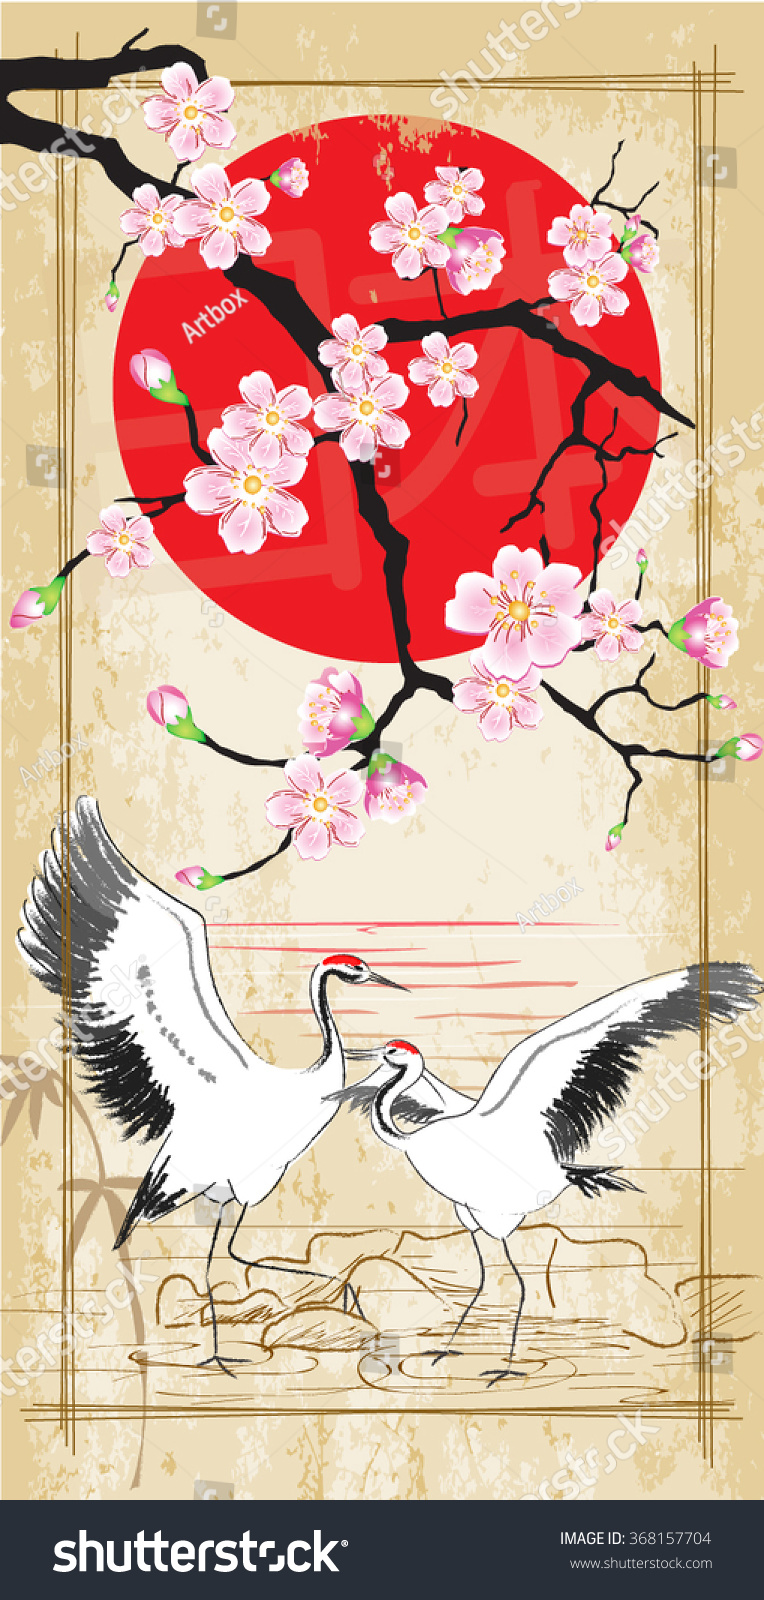 Details about   Box Set Pack Of 30 Postcards Japanese Cranes and Scenery Sakura Oriental #0002 